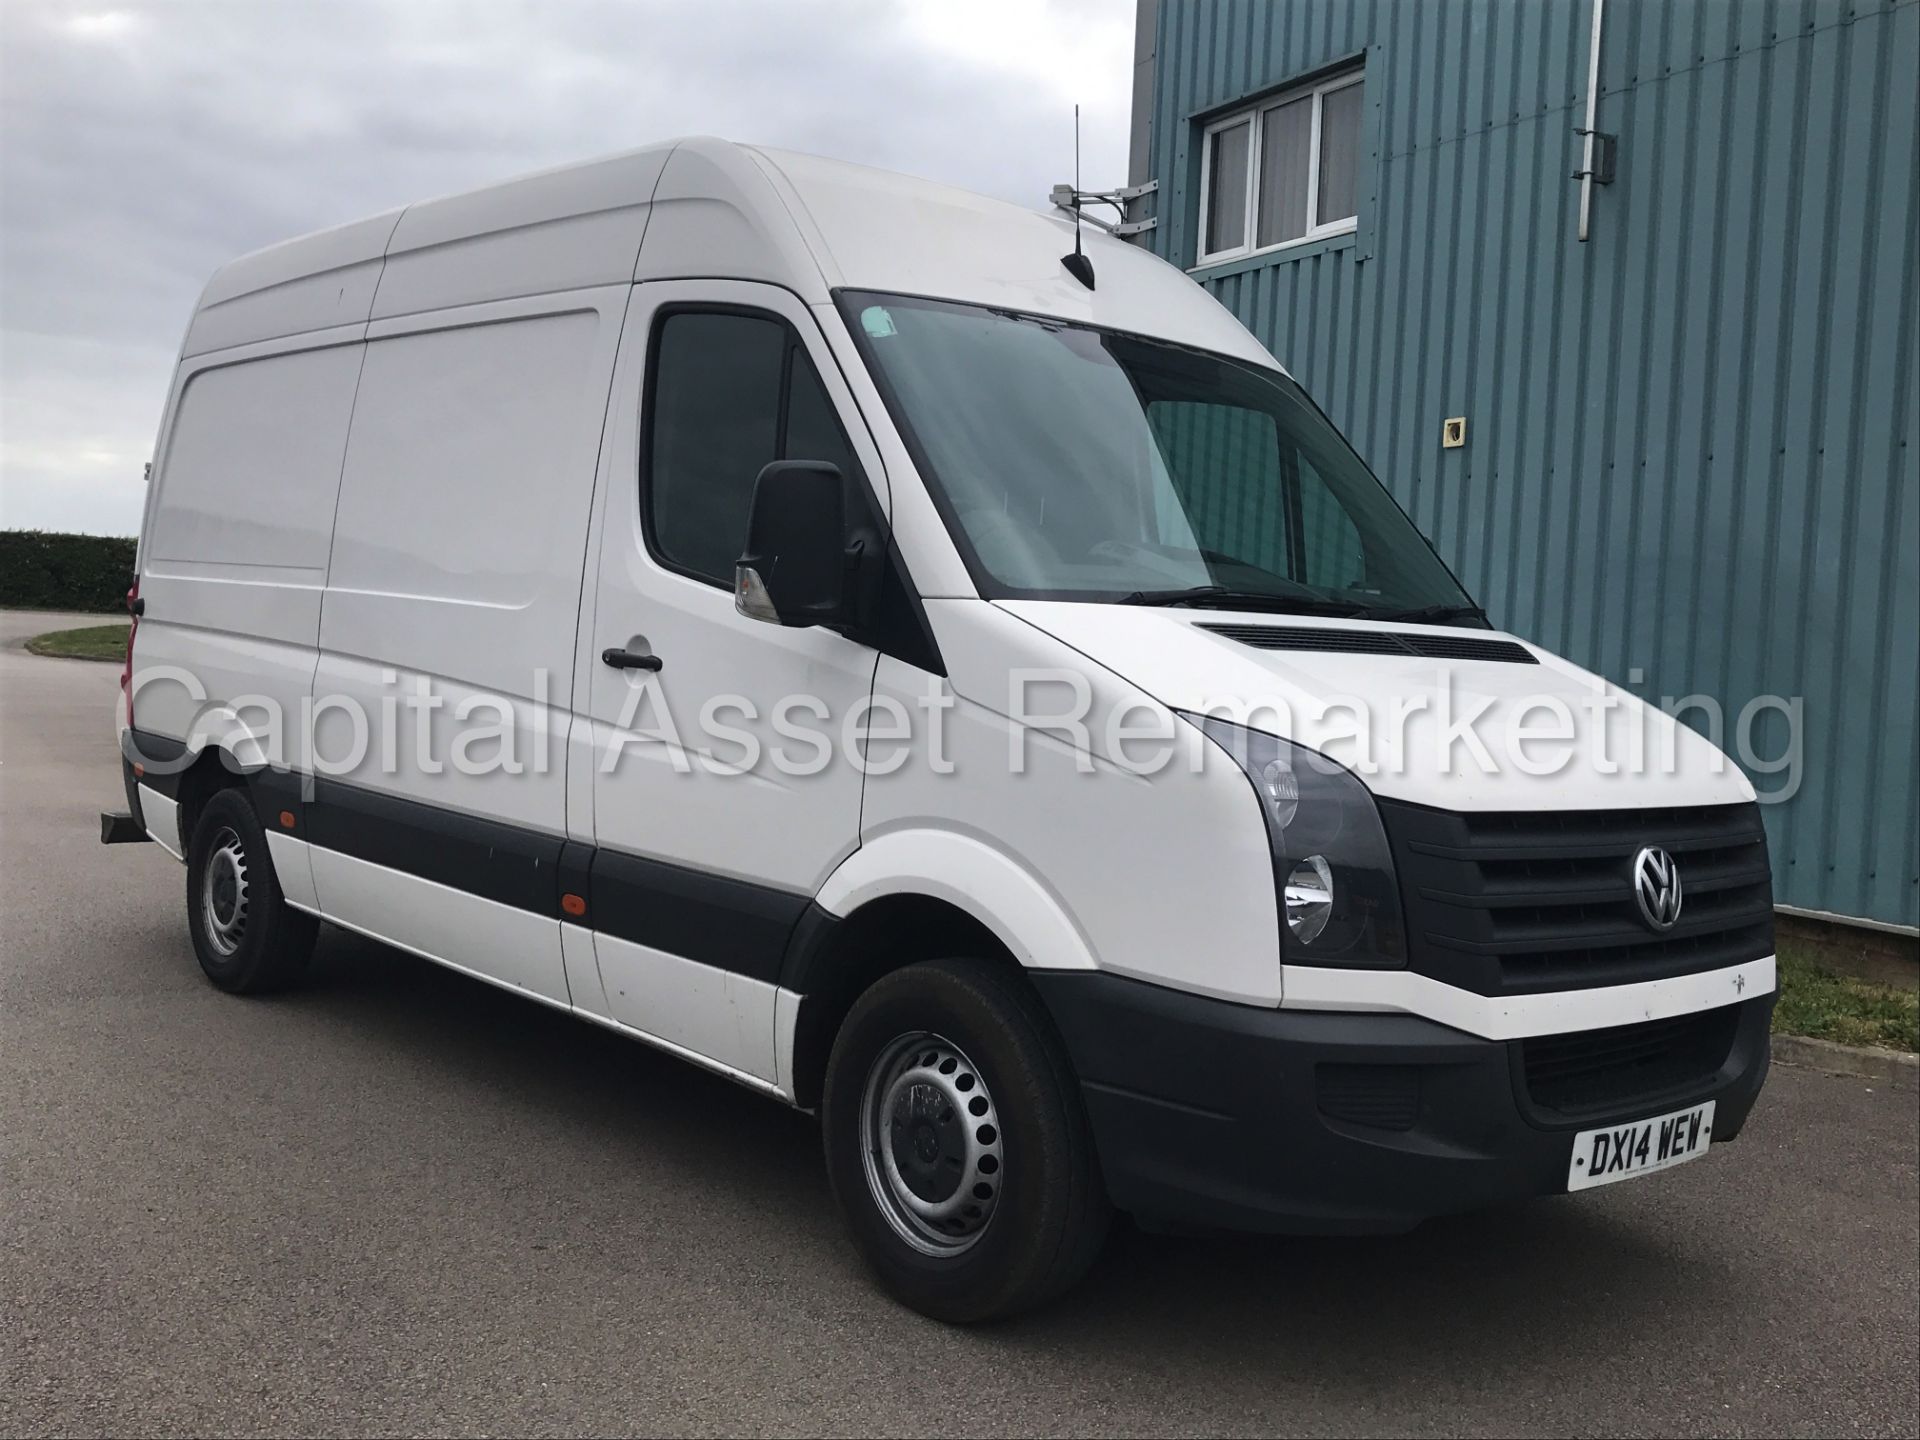 VOLKSWAGEN CRAFTER CR35 'MWB HI-ROOF' (2014) '2.0 TDI - 109 PS - 6 SPEED' *1 COMPANY OWNER FROM NEW*